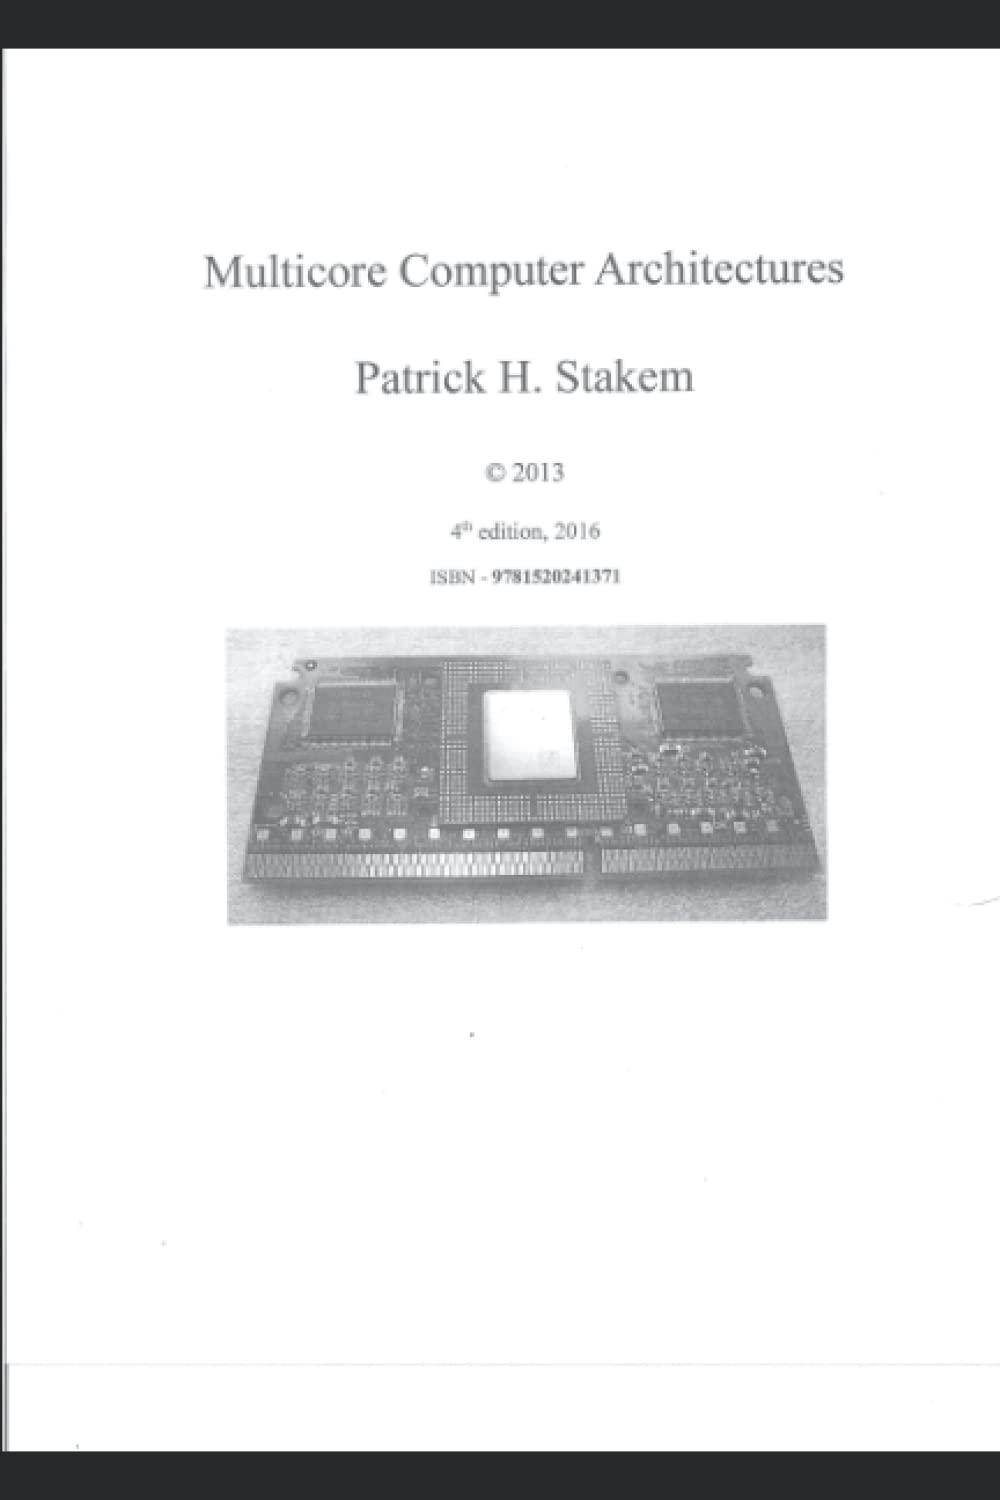 multicore computer architectures 1st edition patrick stakem 1520241372, 978-1520241371